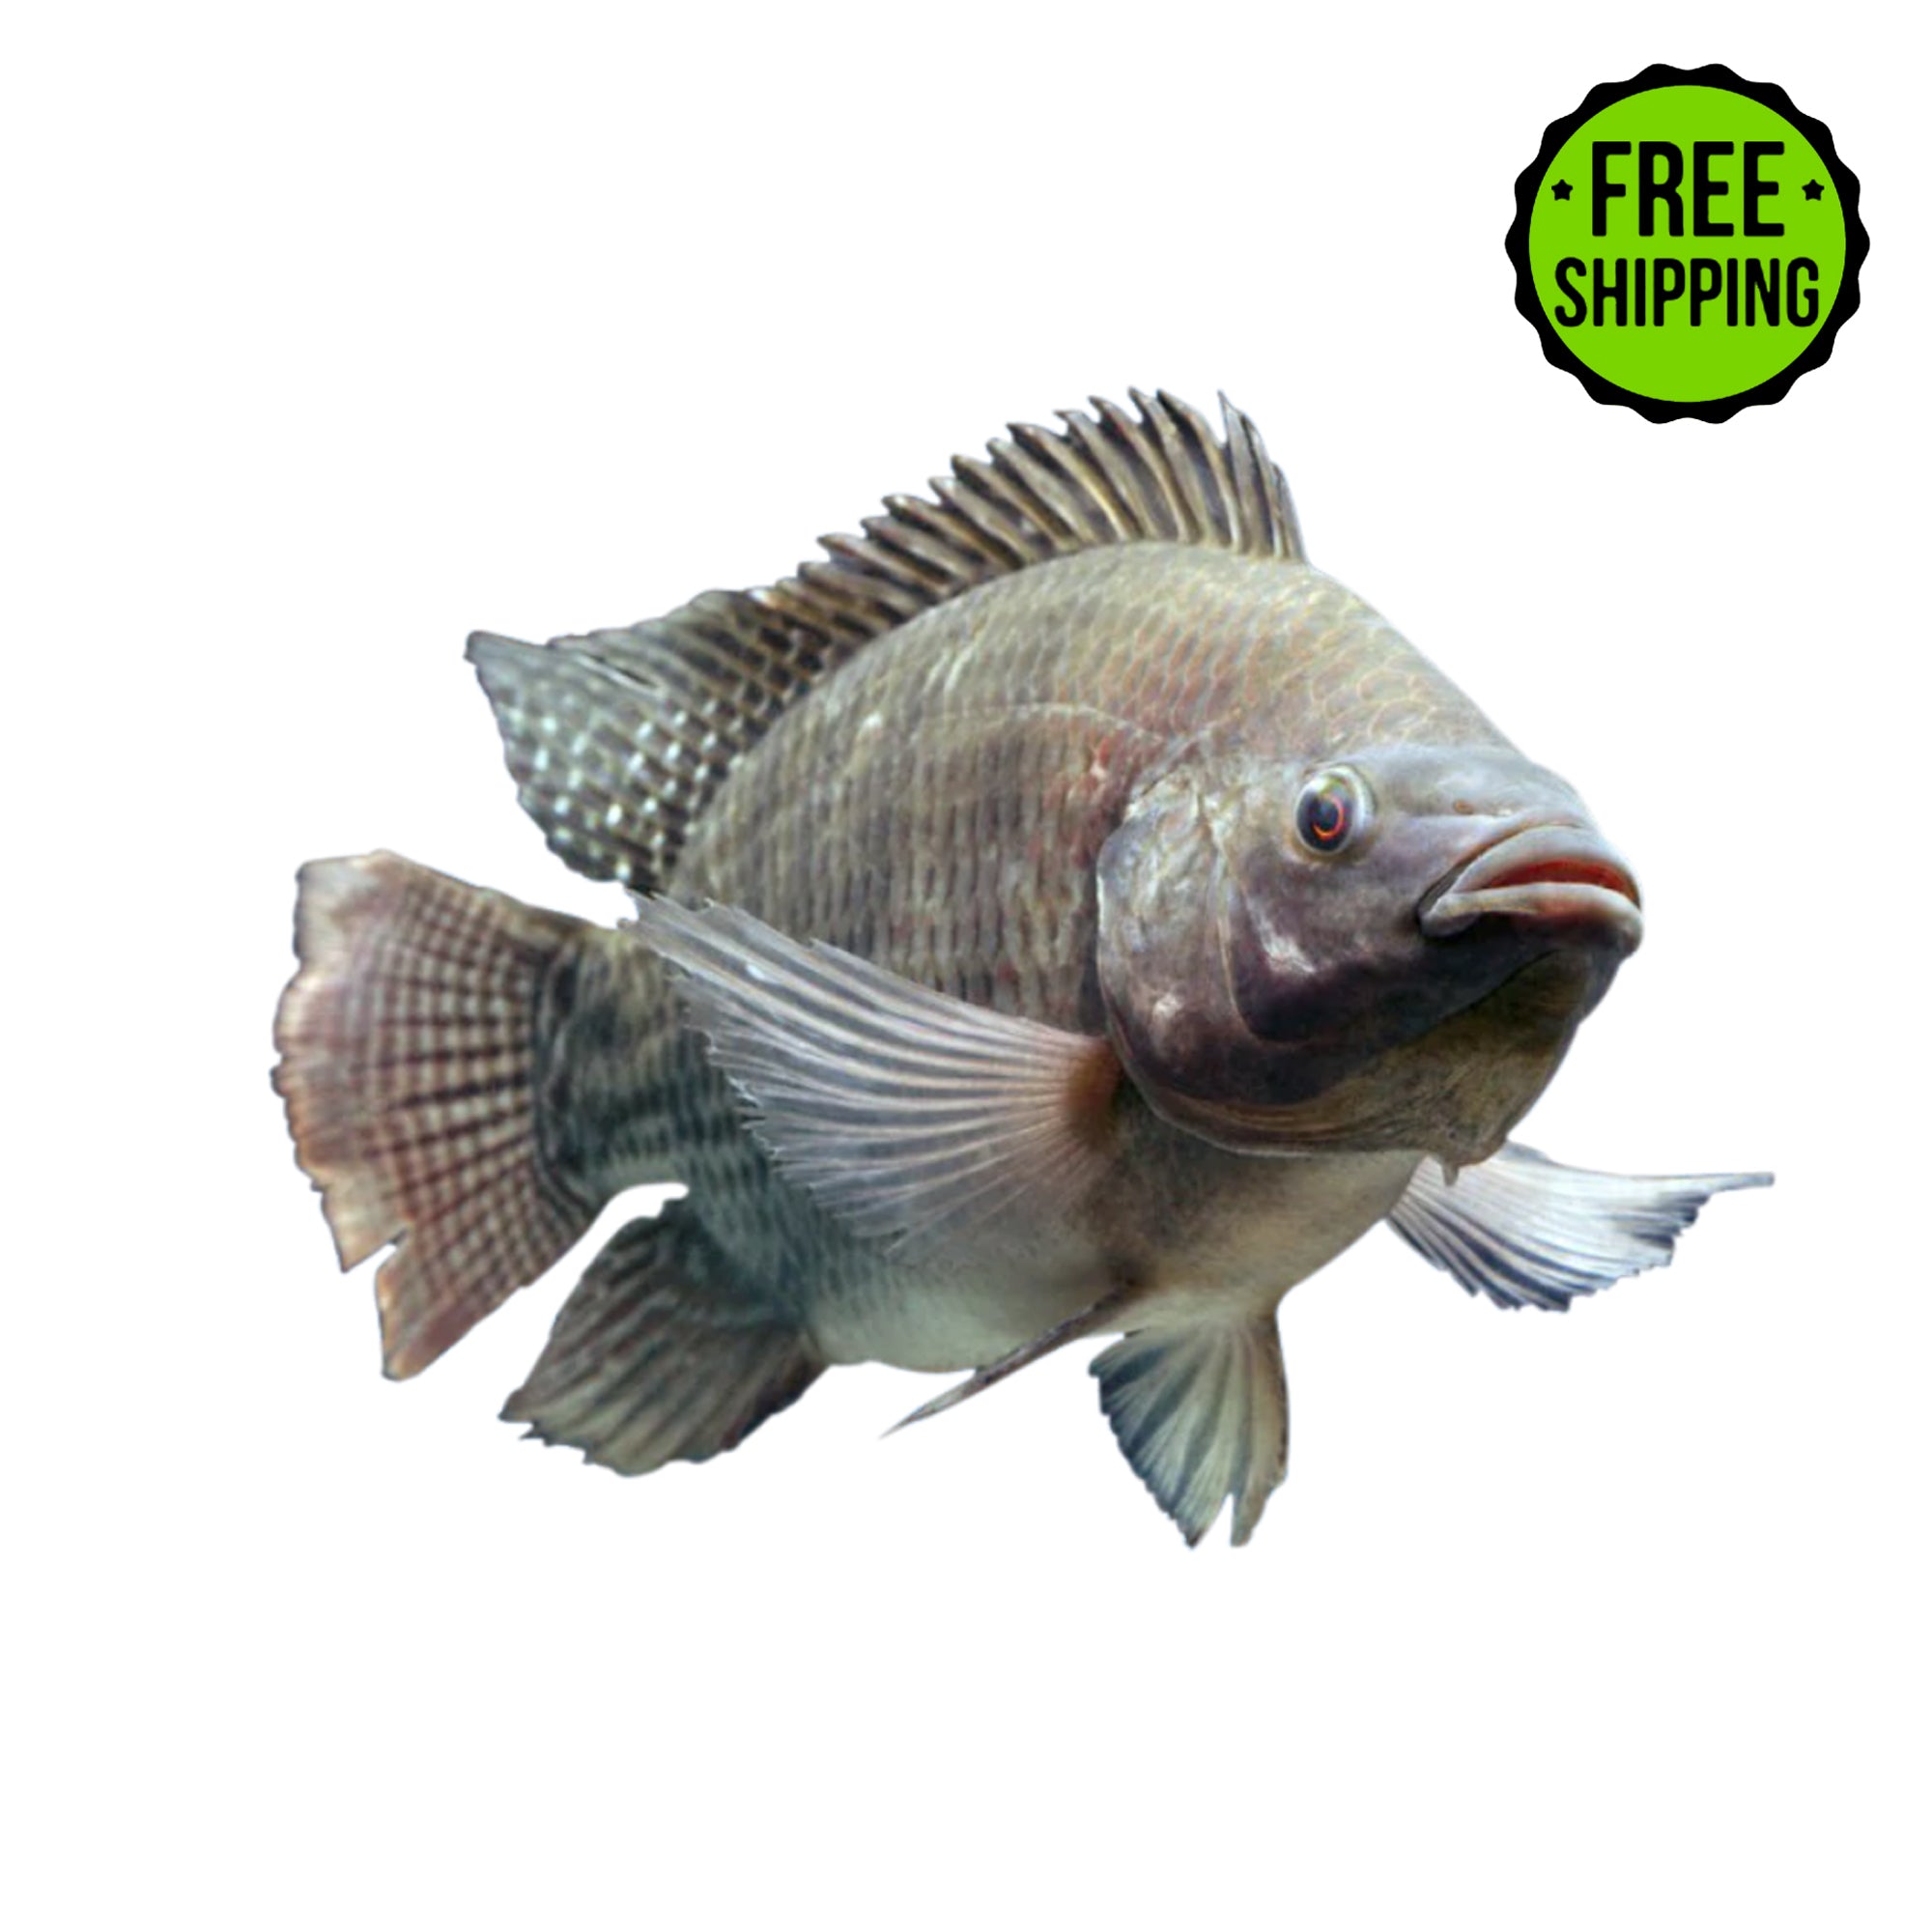 A BLUE TILAPIA BREEDING COLONY with the words free shipping on it, from Tilapia Depot.